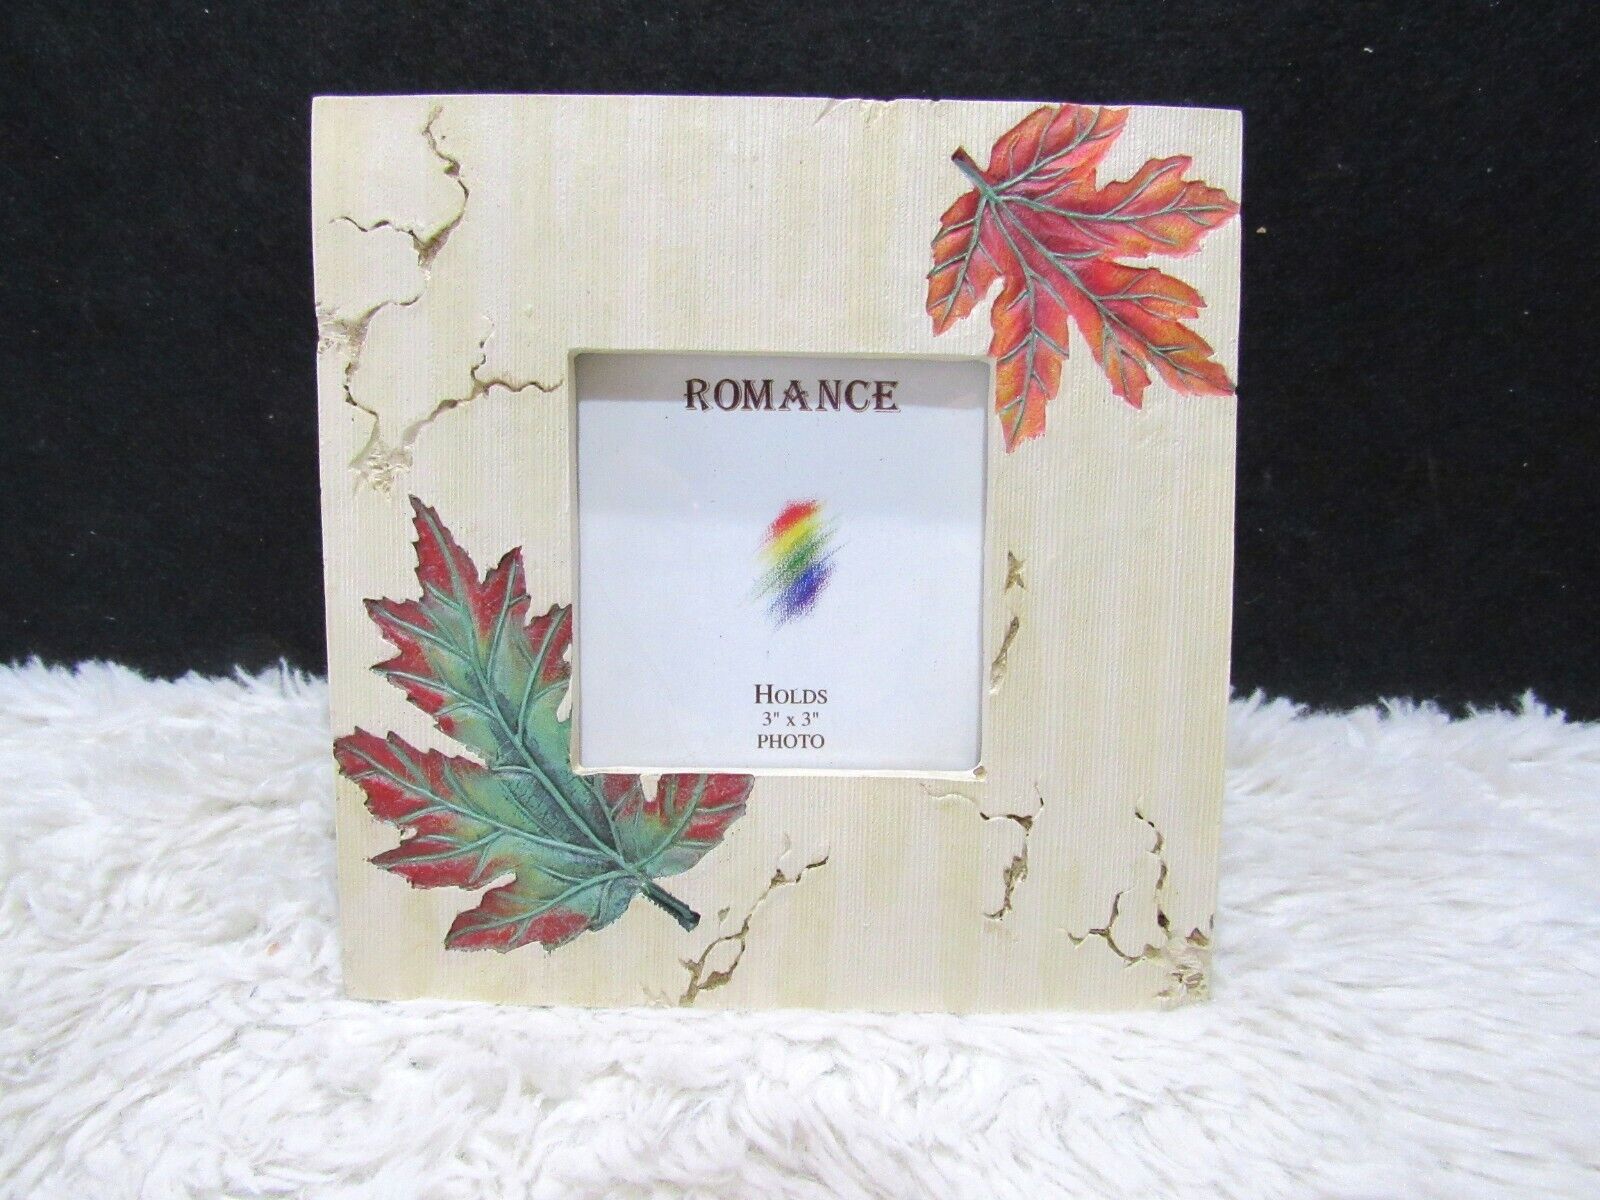 3D Leaves on Surface 3 x 3 Inch Photo Frame, Ceramic-Like Material, Decorative